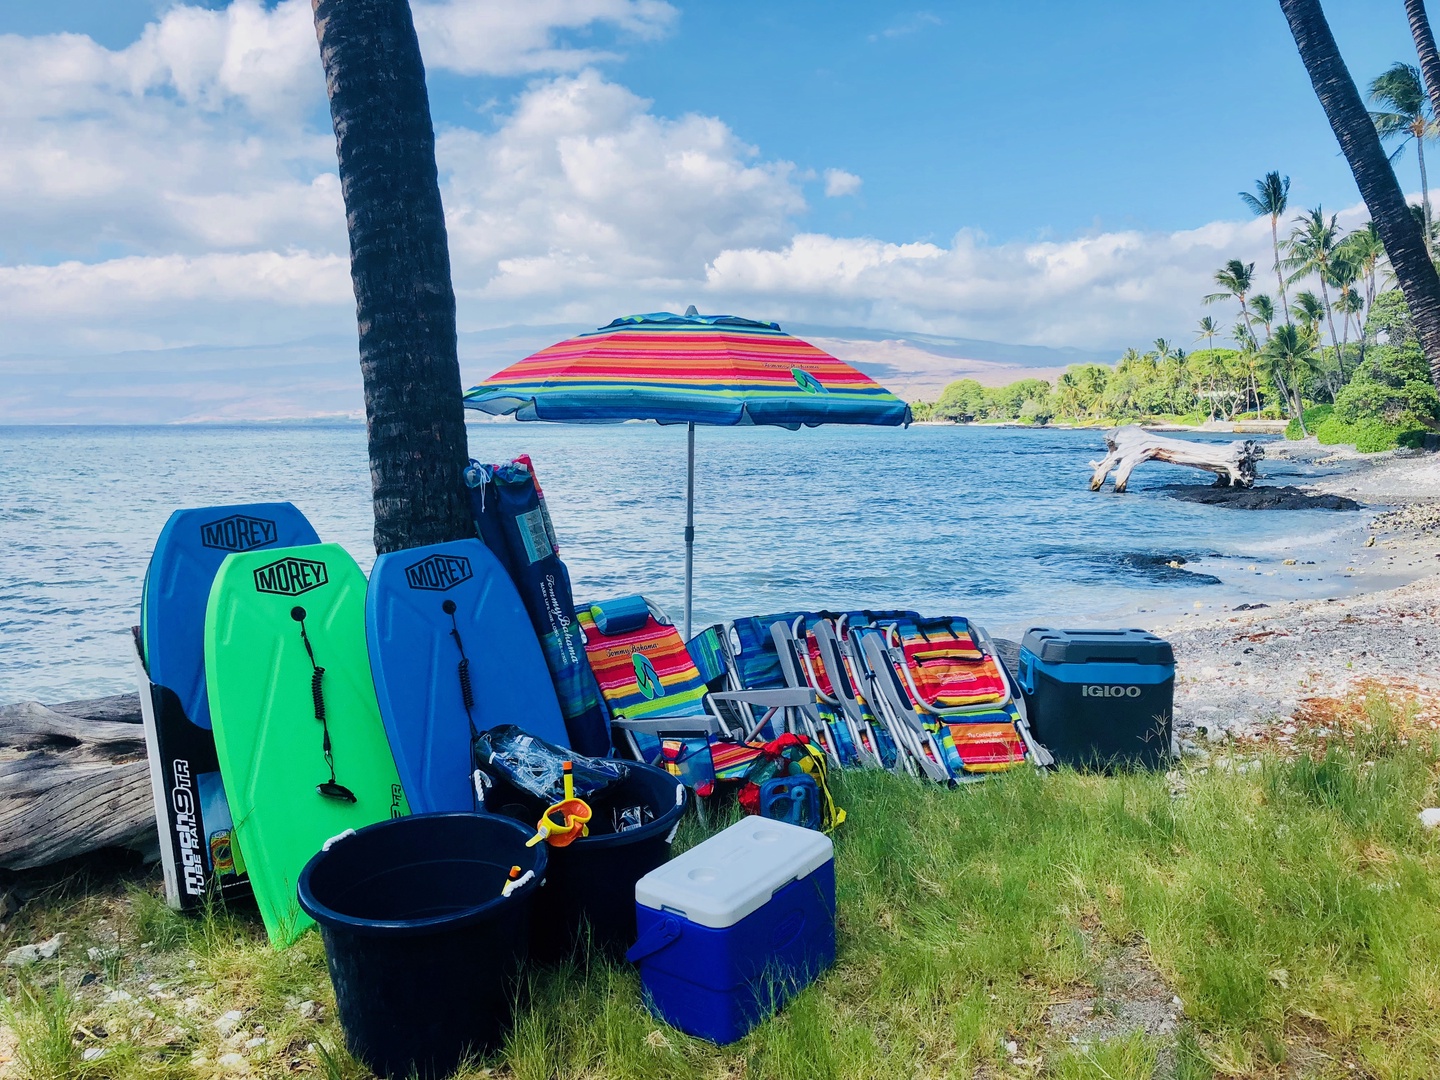 Kamuela Vacation Rentals, 4BD Estate Home at Puako Bay (74) - This property comes with a generous supply of beach amenities including snorkel gear, backpack beach chairs, umbrellas, boogie boards, coolers, snorkel gear for kids and adults!